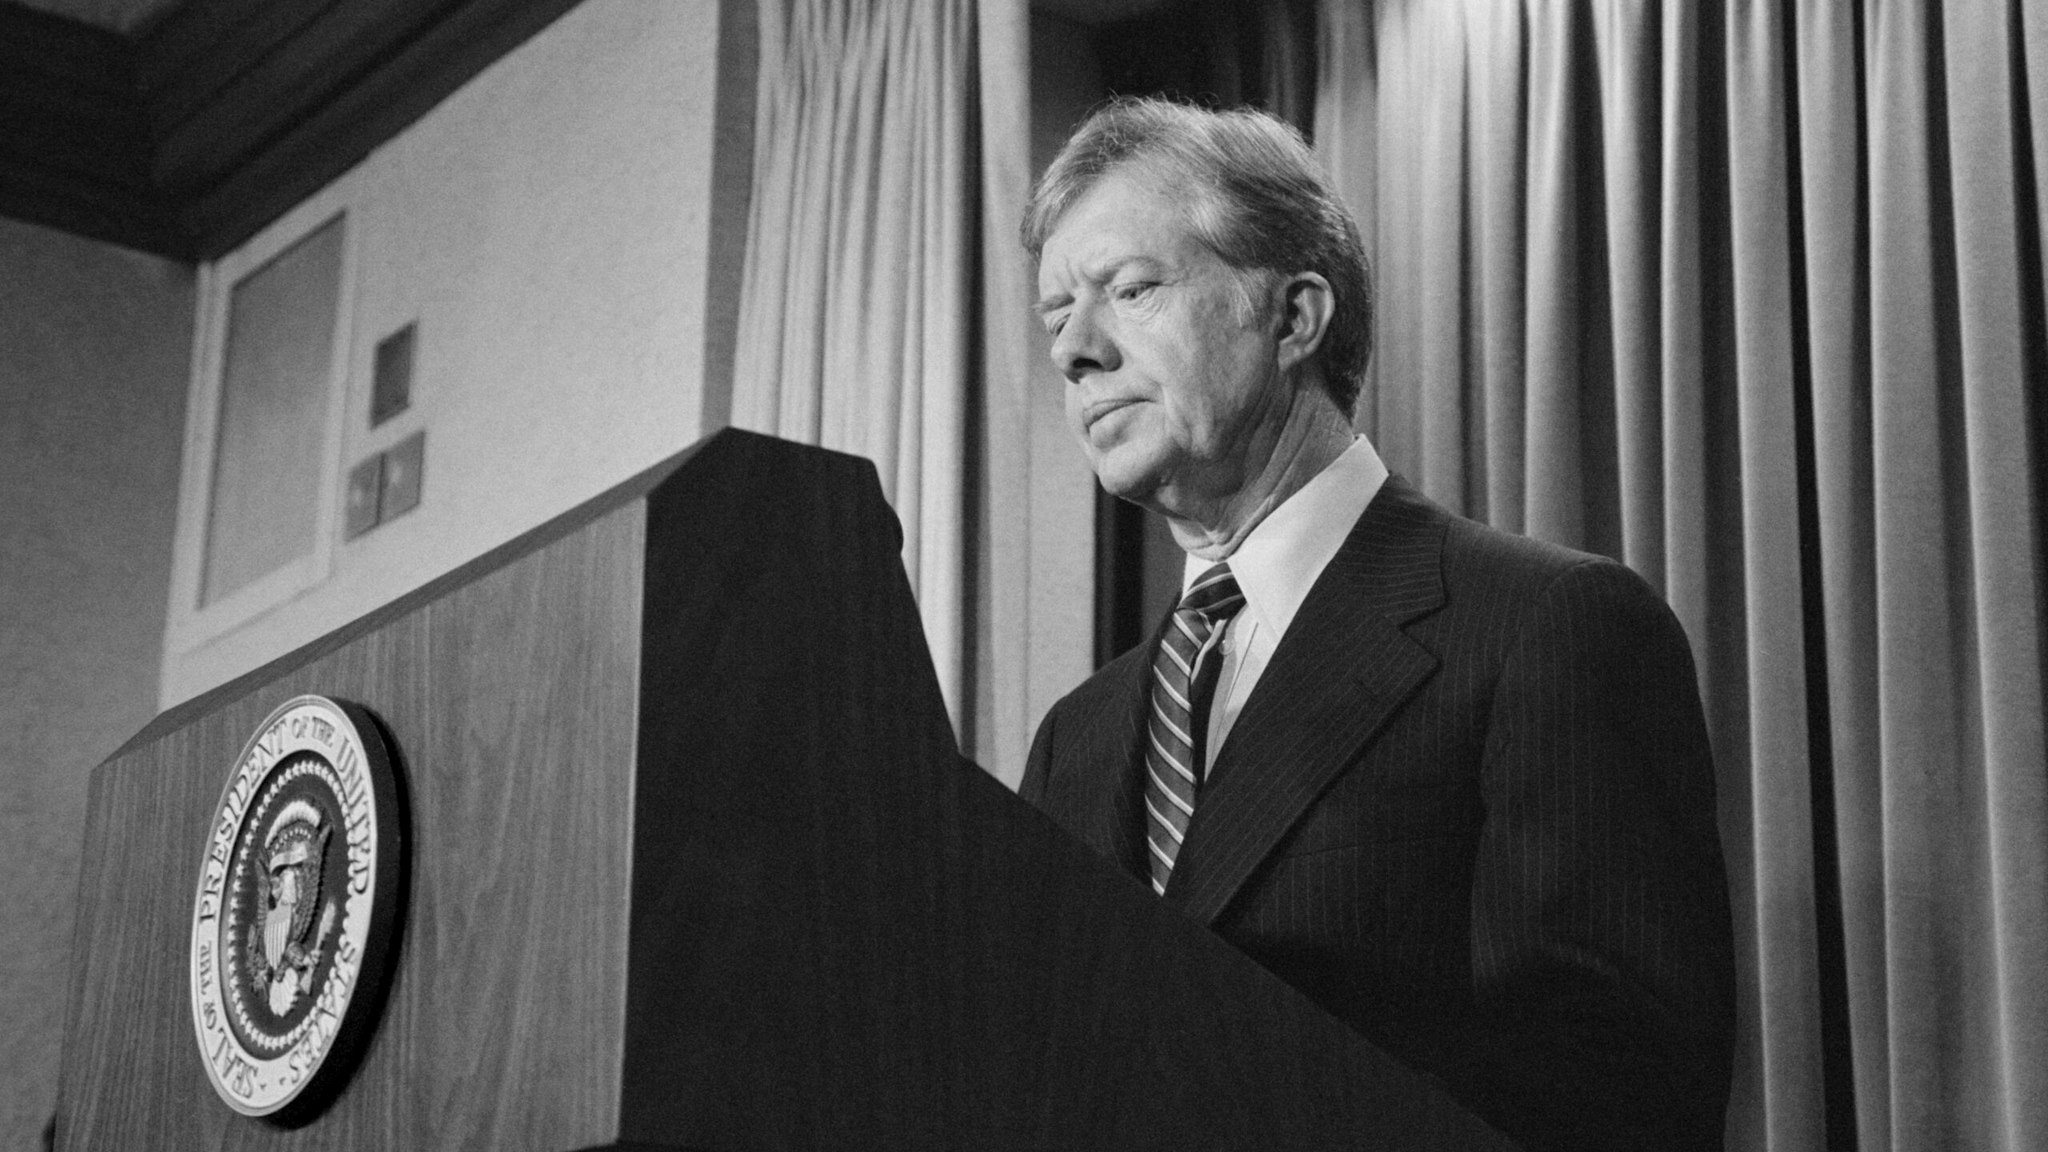 U.S. President Jimmy Carter announces new sanctions against Iran in retaliation for taking U.S. Hostages, Washington, D.C., USA, photograph by Marion S. Trikosko, April 7, 1980.